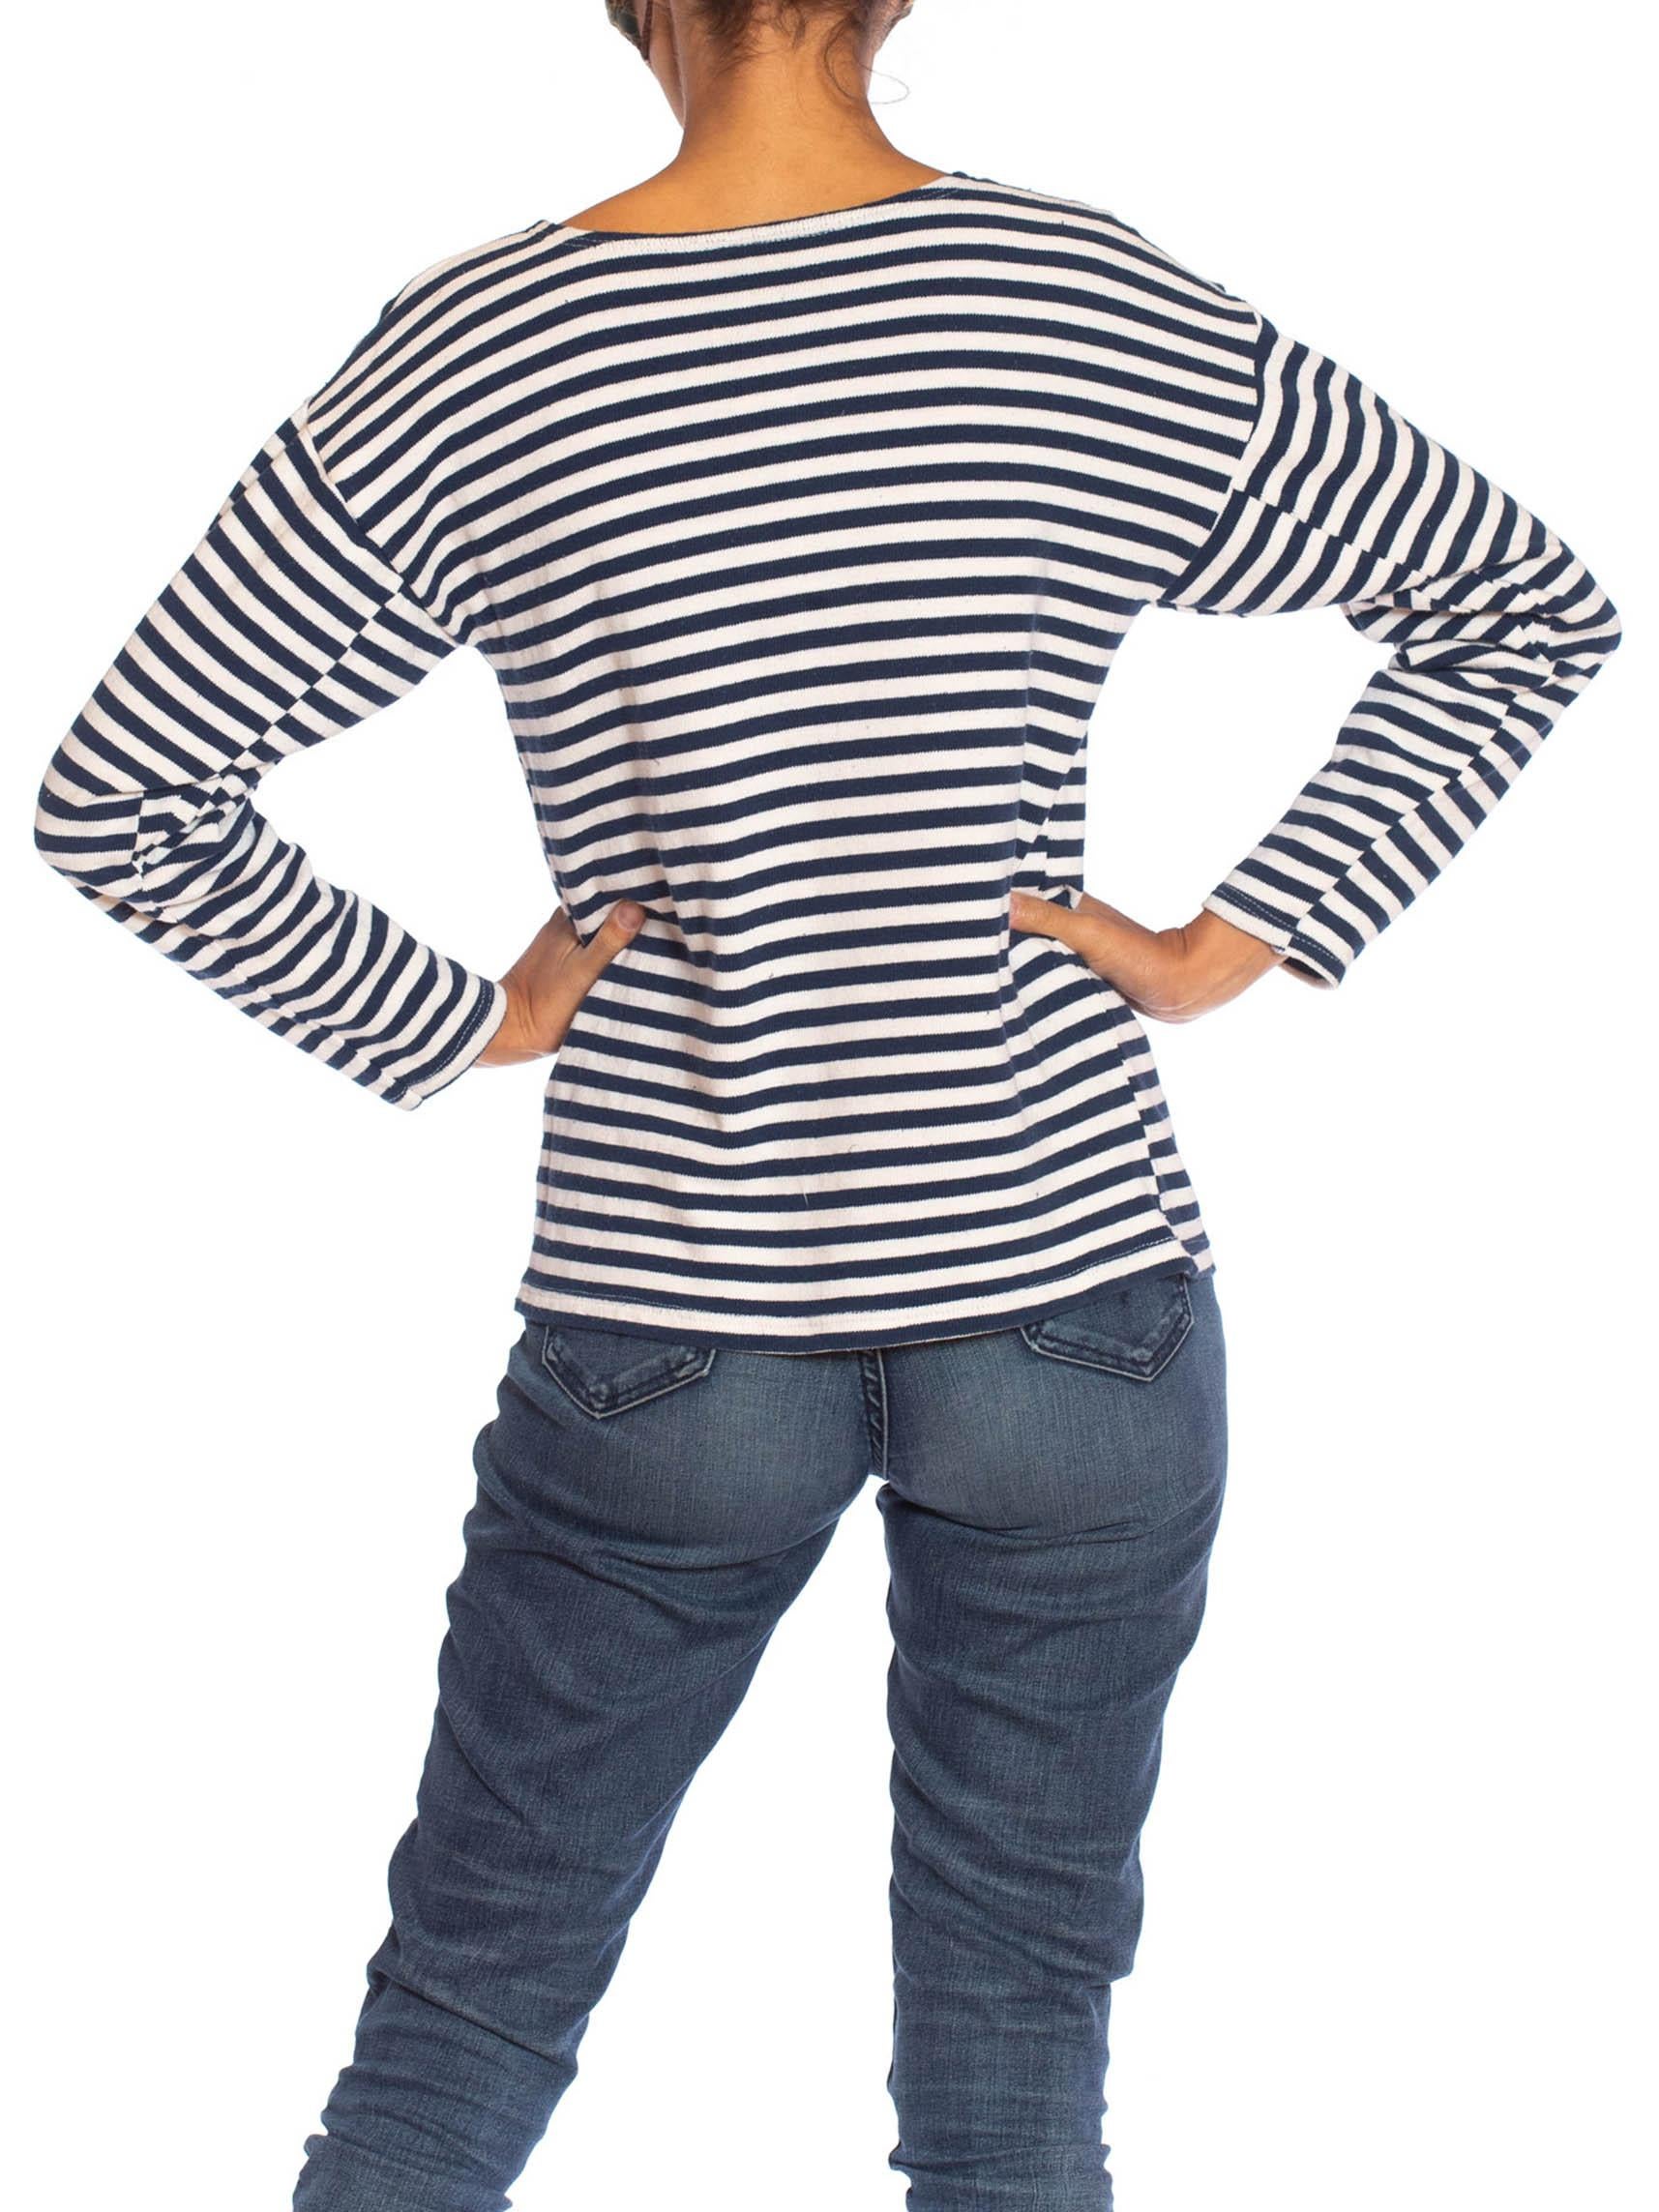 Women's or Men's 1970S Blue & White Striped Cotton Knit Authentic French Mariner Sweater For Sale